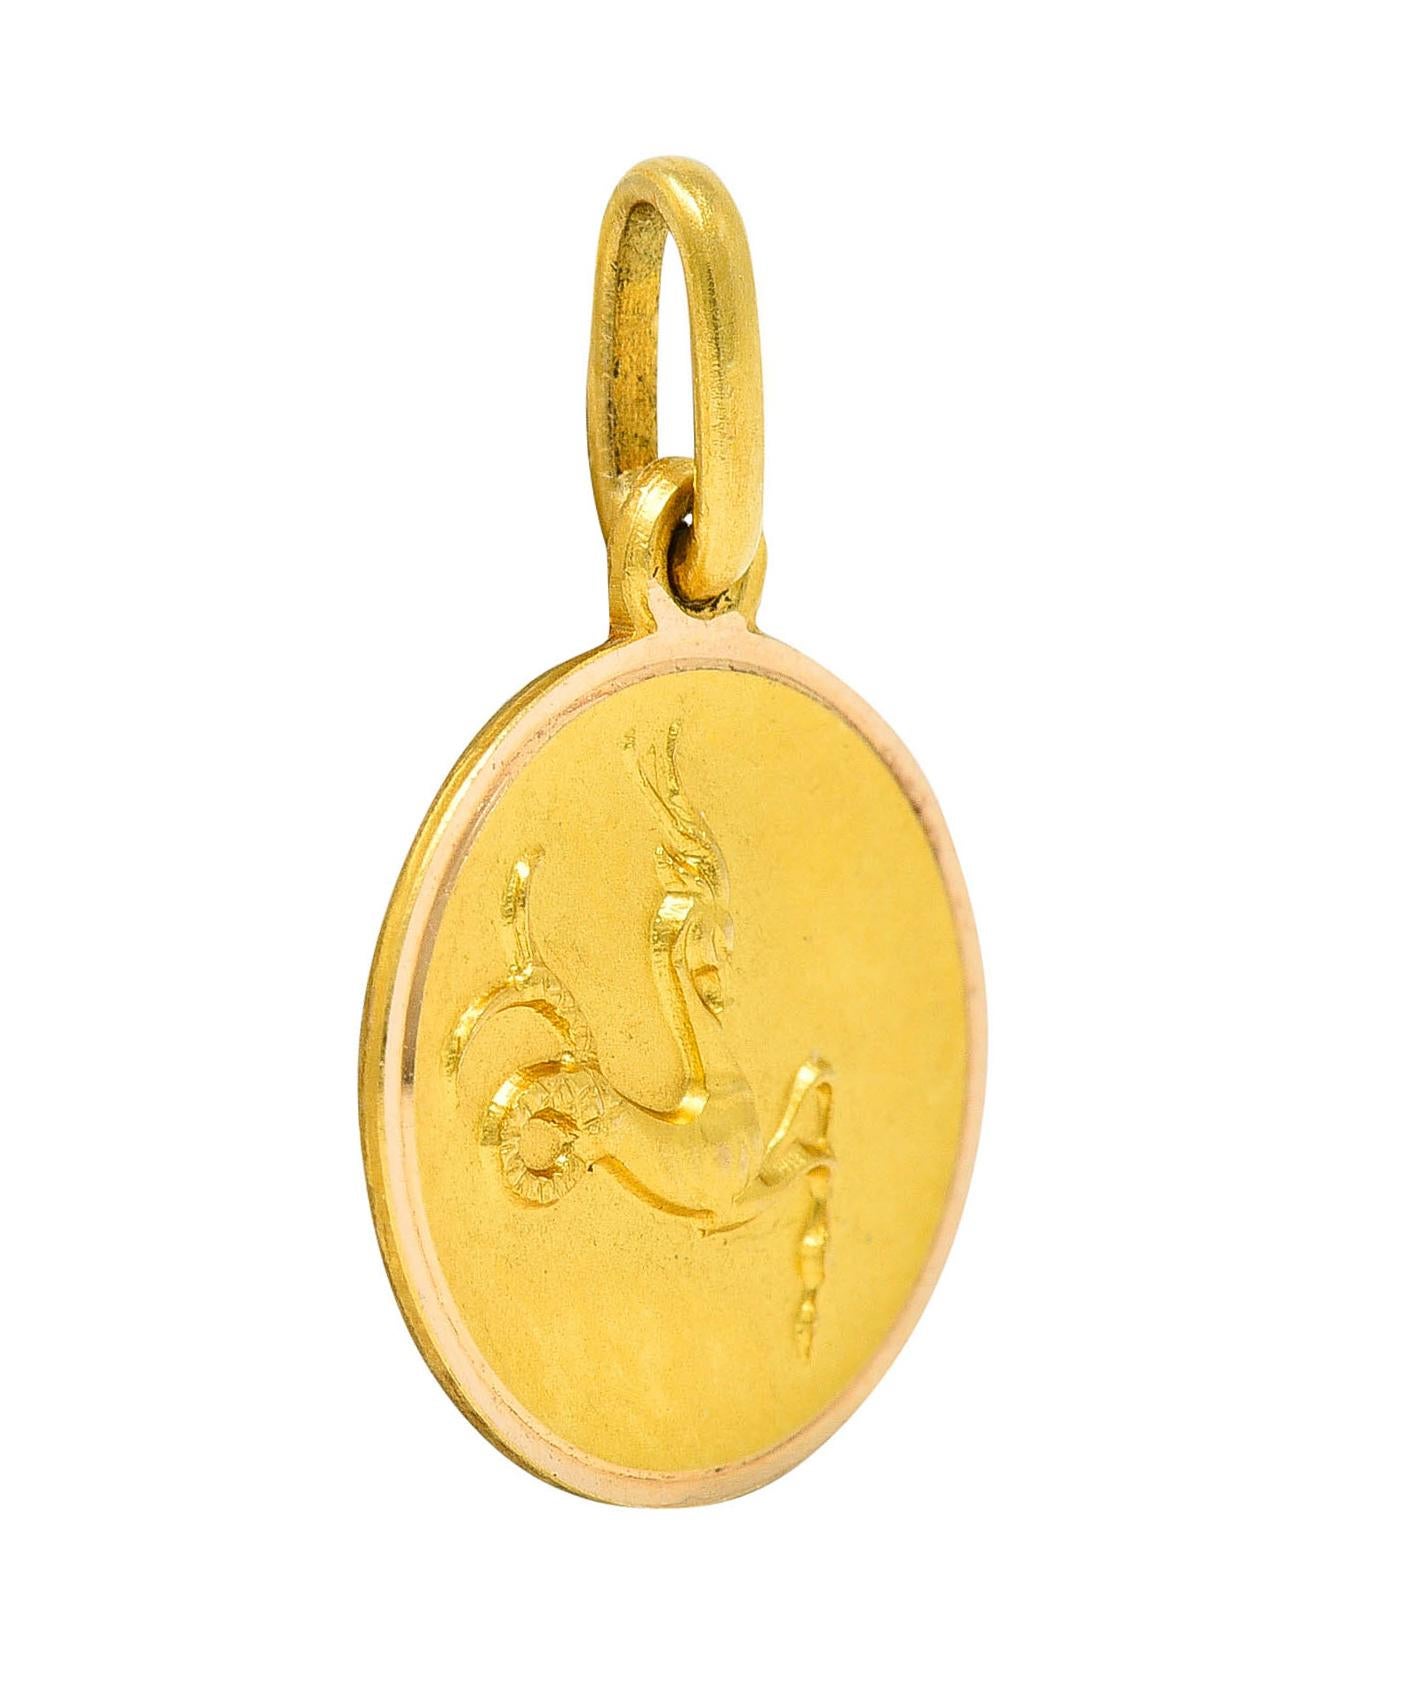 Circular charm has a matte finish and a raised rendering of capricorn

Zodiac figure depicted as a stylized goats head with fish tail 

Raised high polish frame

Italian assay marks for 18 karat gold

Circa: 1970's 

Measures: 7/16 x 11/16 inch